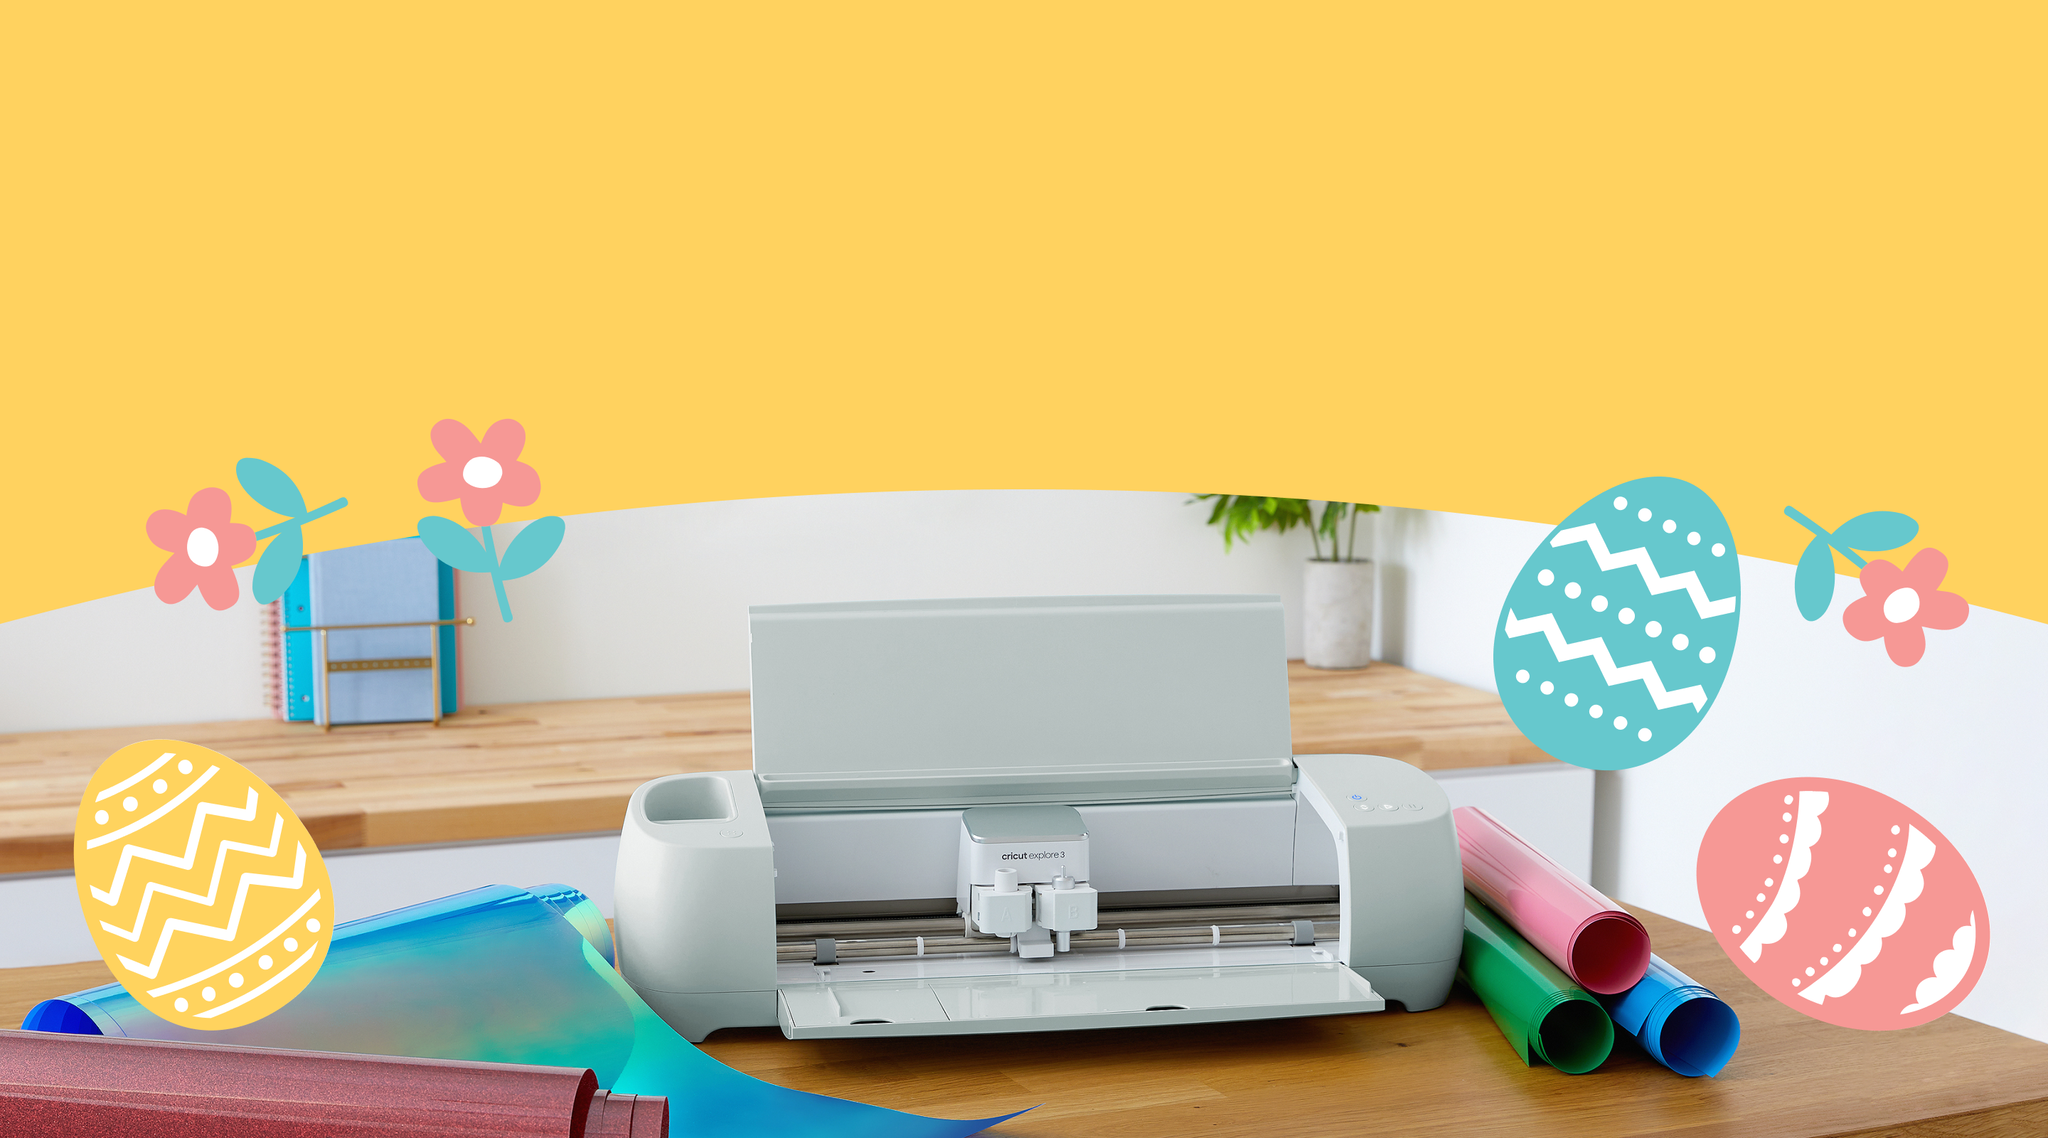 Cricut Official Store Online, February 2024